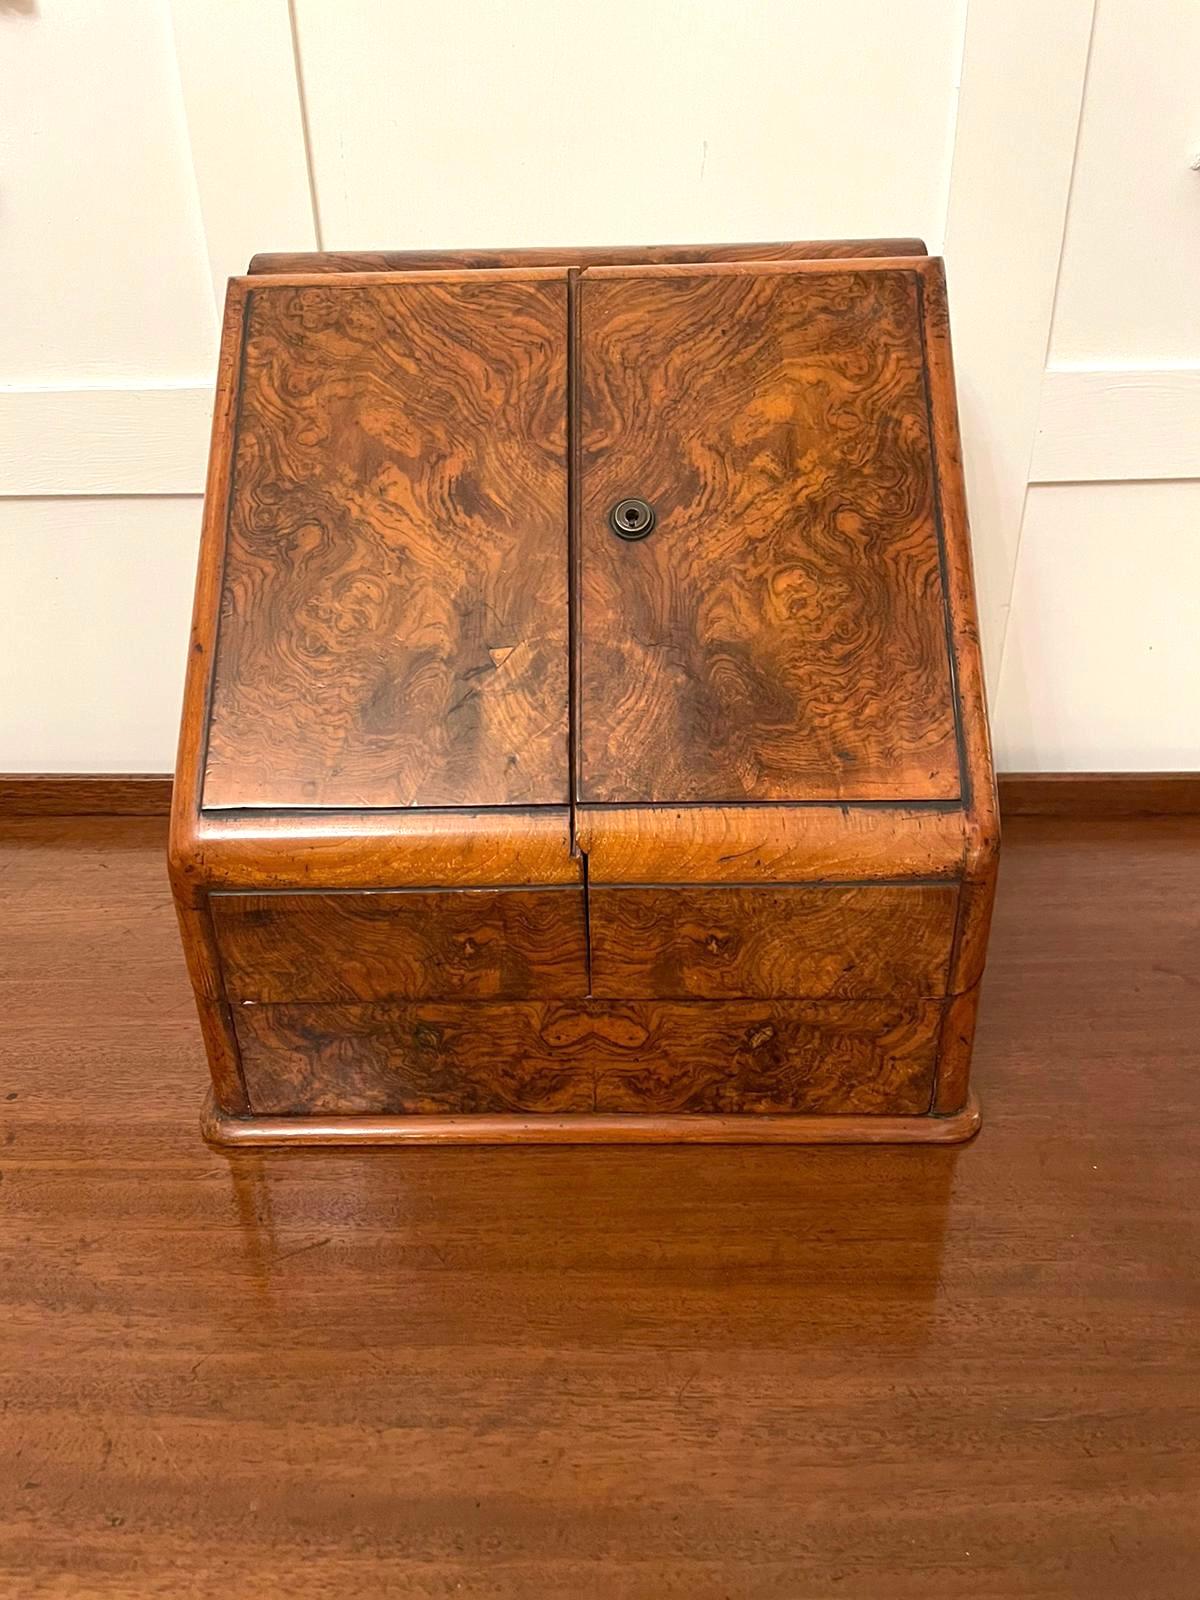 Antique Victorian quality burr walnut stationery box having quality burr walnut doors opening to reveal a fitted interior consisting of a calandra, pair of original ink wells, letter rack, notepad and a burr walnut drawer.

Measures: H 32cm 
W